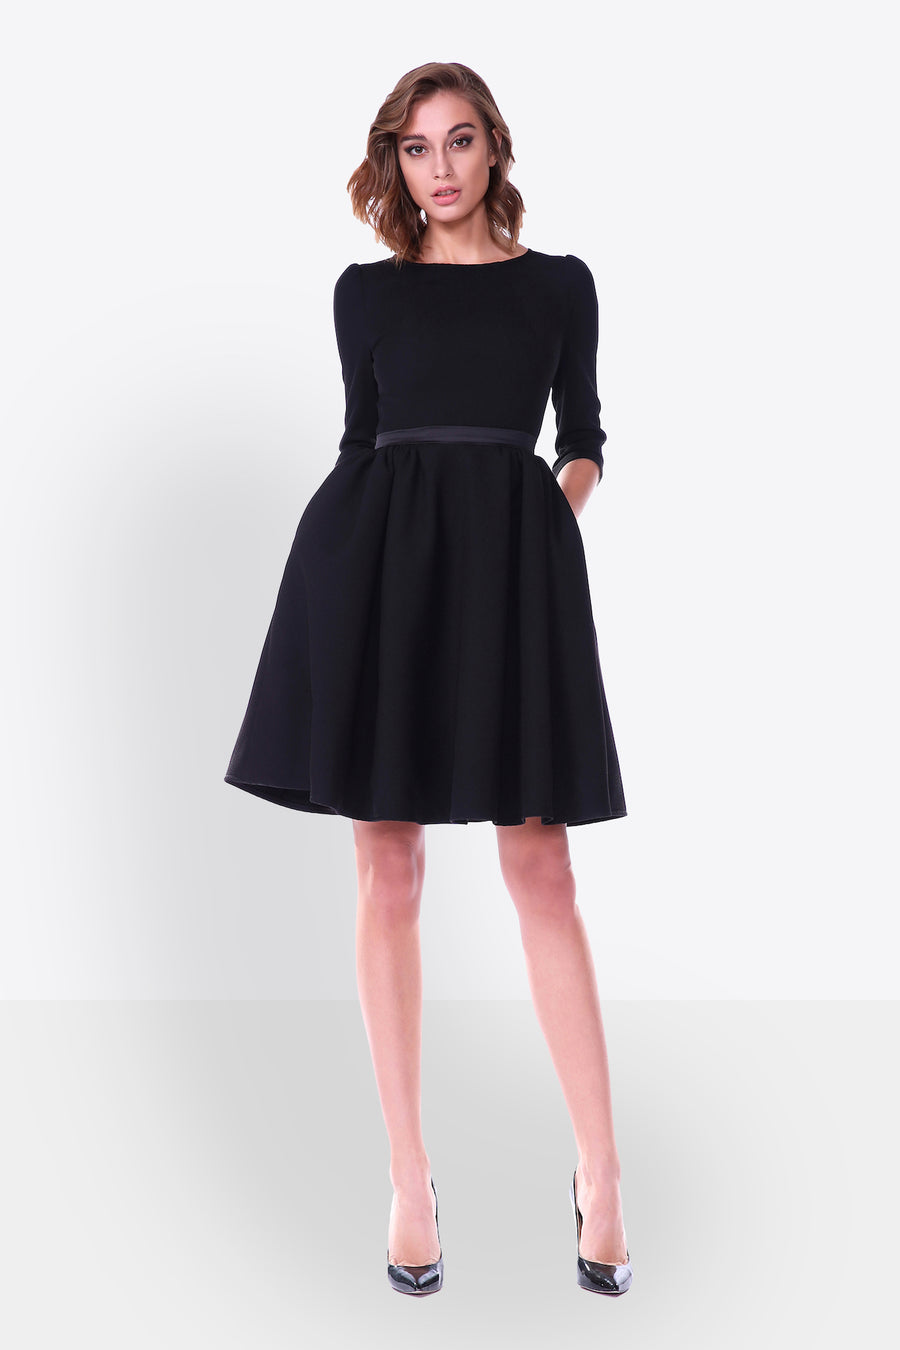 Sabrina Neck Fit and Flare Cocktail Dress